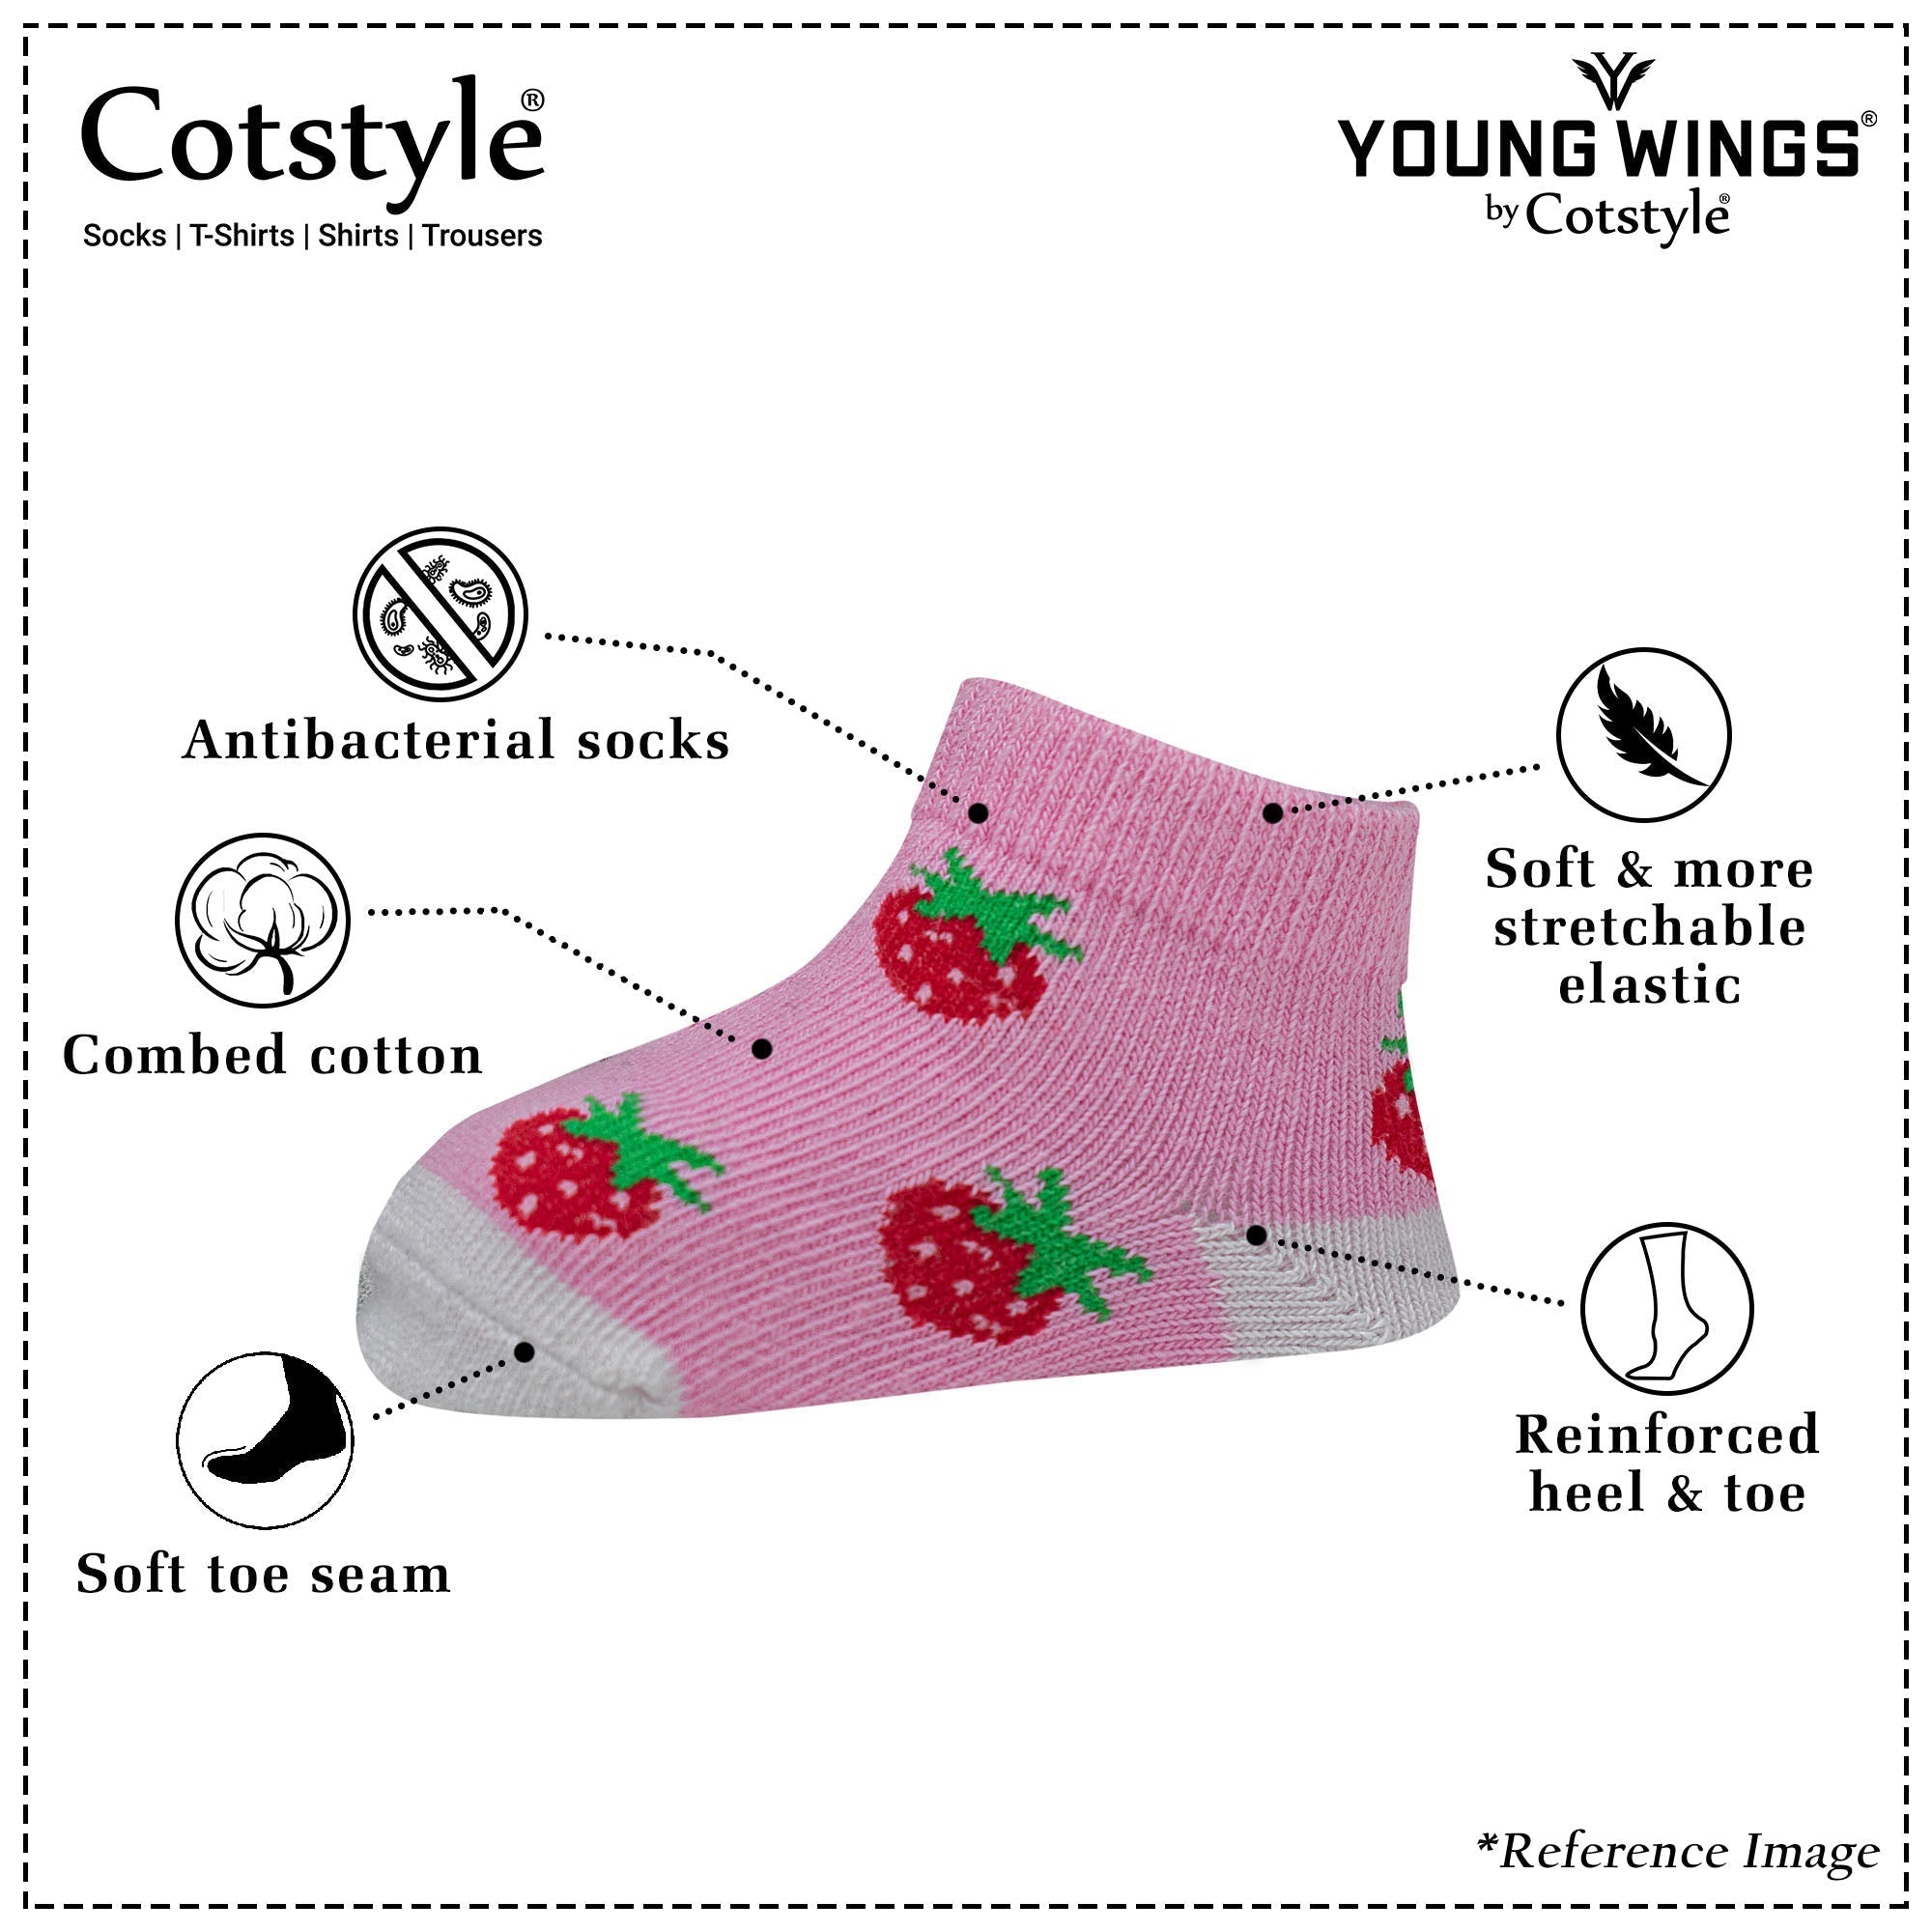 Kids Cotton Antibacterial Ankle length Socks - YW-ASP-8019 - Pack of 5 Pairs